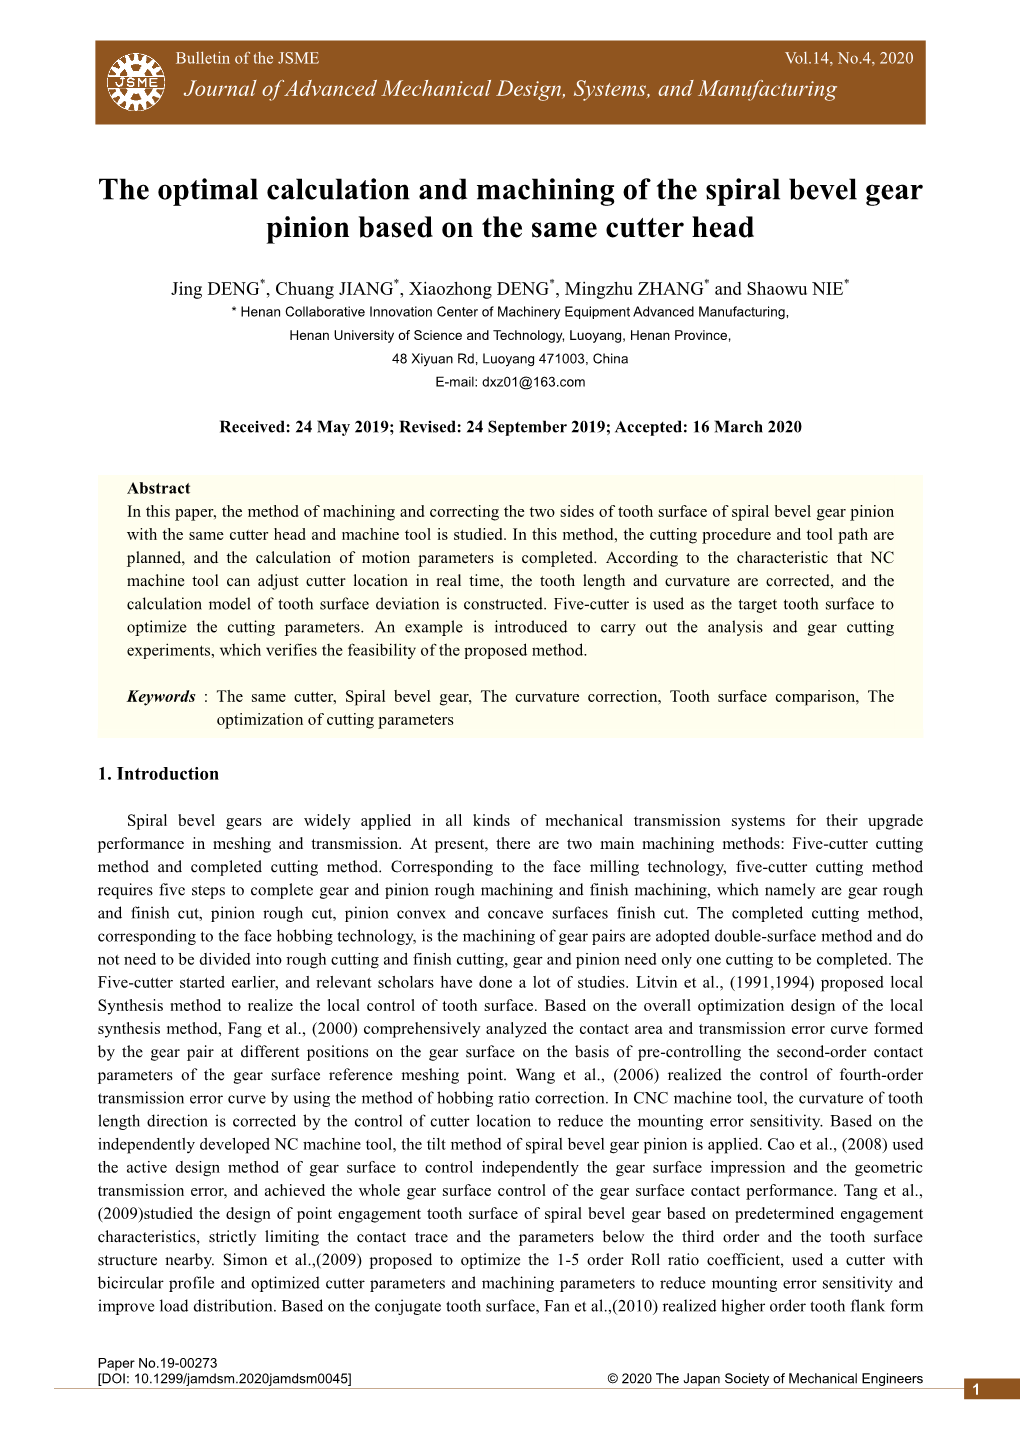 The Optimal Calculation and Machining of the Spiral Bevel Gear Pinion Based on the Same Cutter Head